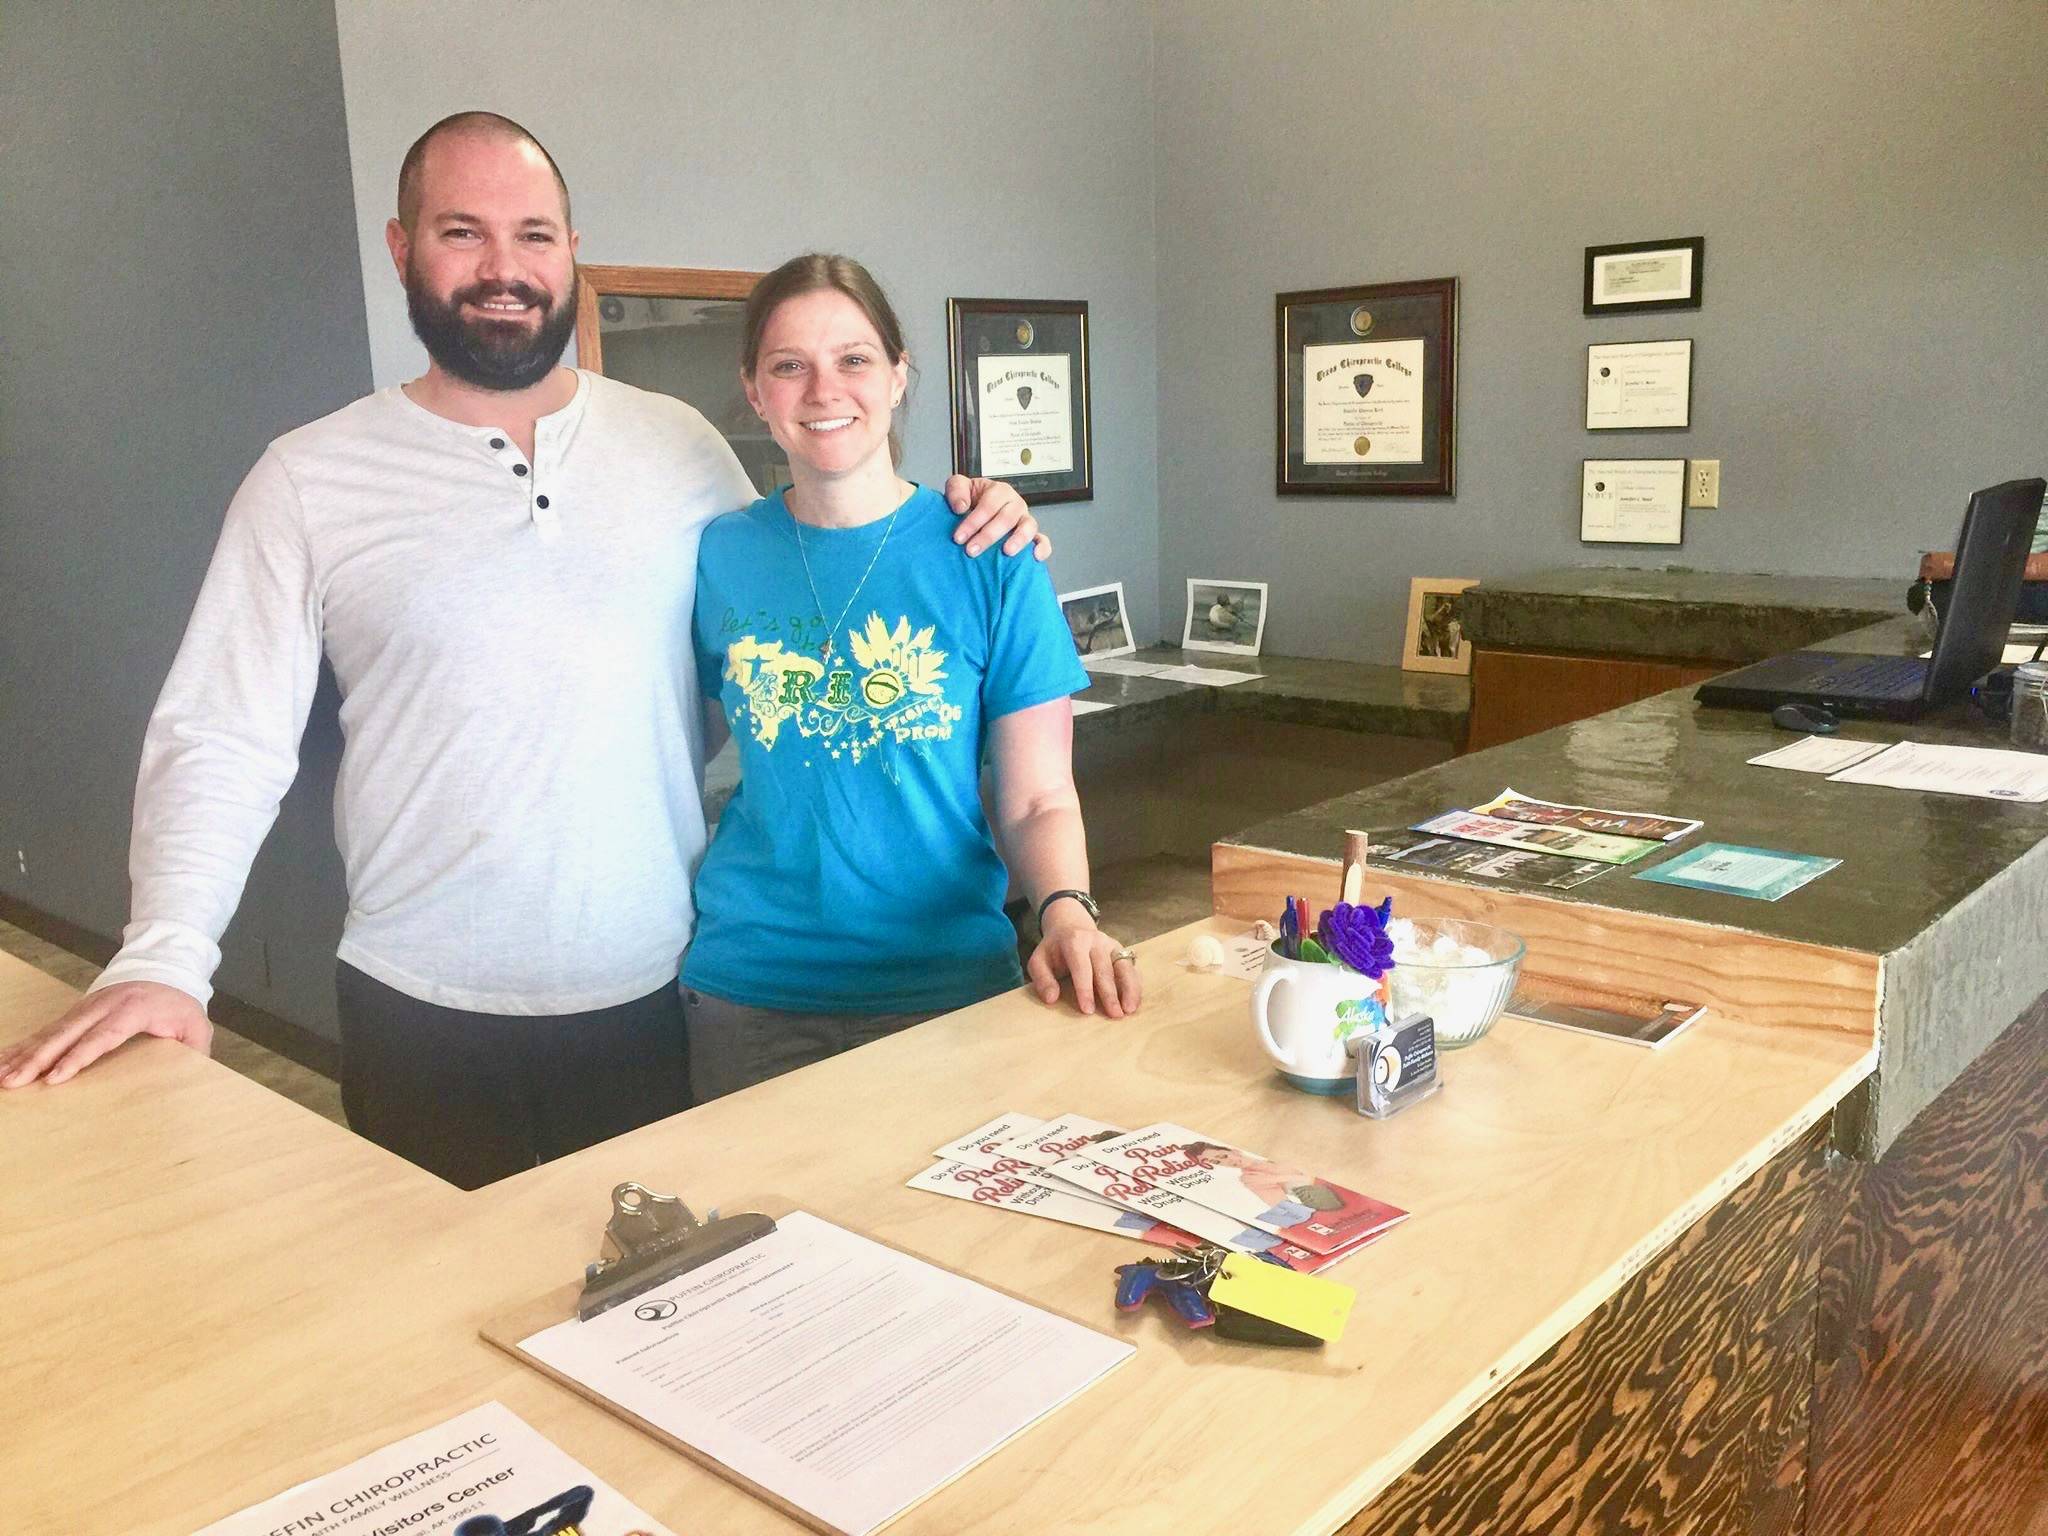 Dr. Jennifer Reed and Dr. Adam Hawkins at Puffin Chiropractic in Old Town Kenai, Alaska, on Monday, Aug. 13, 2018. (Photo by Victoria Petersen/Peninsula Clarion)